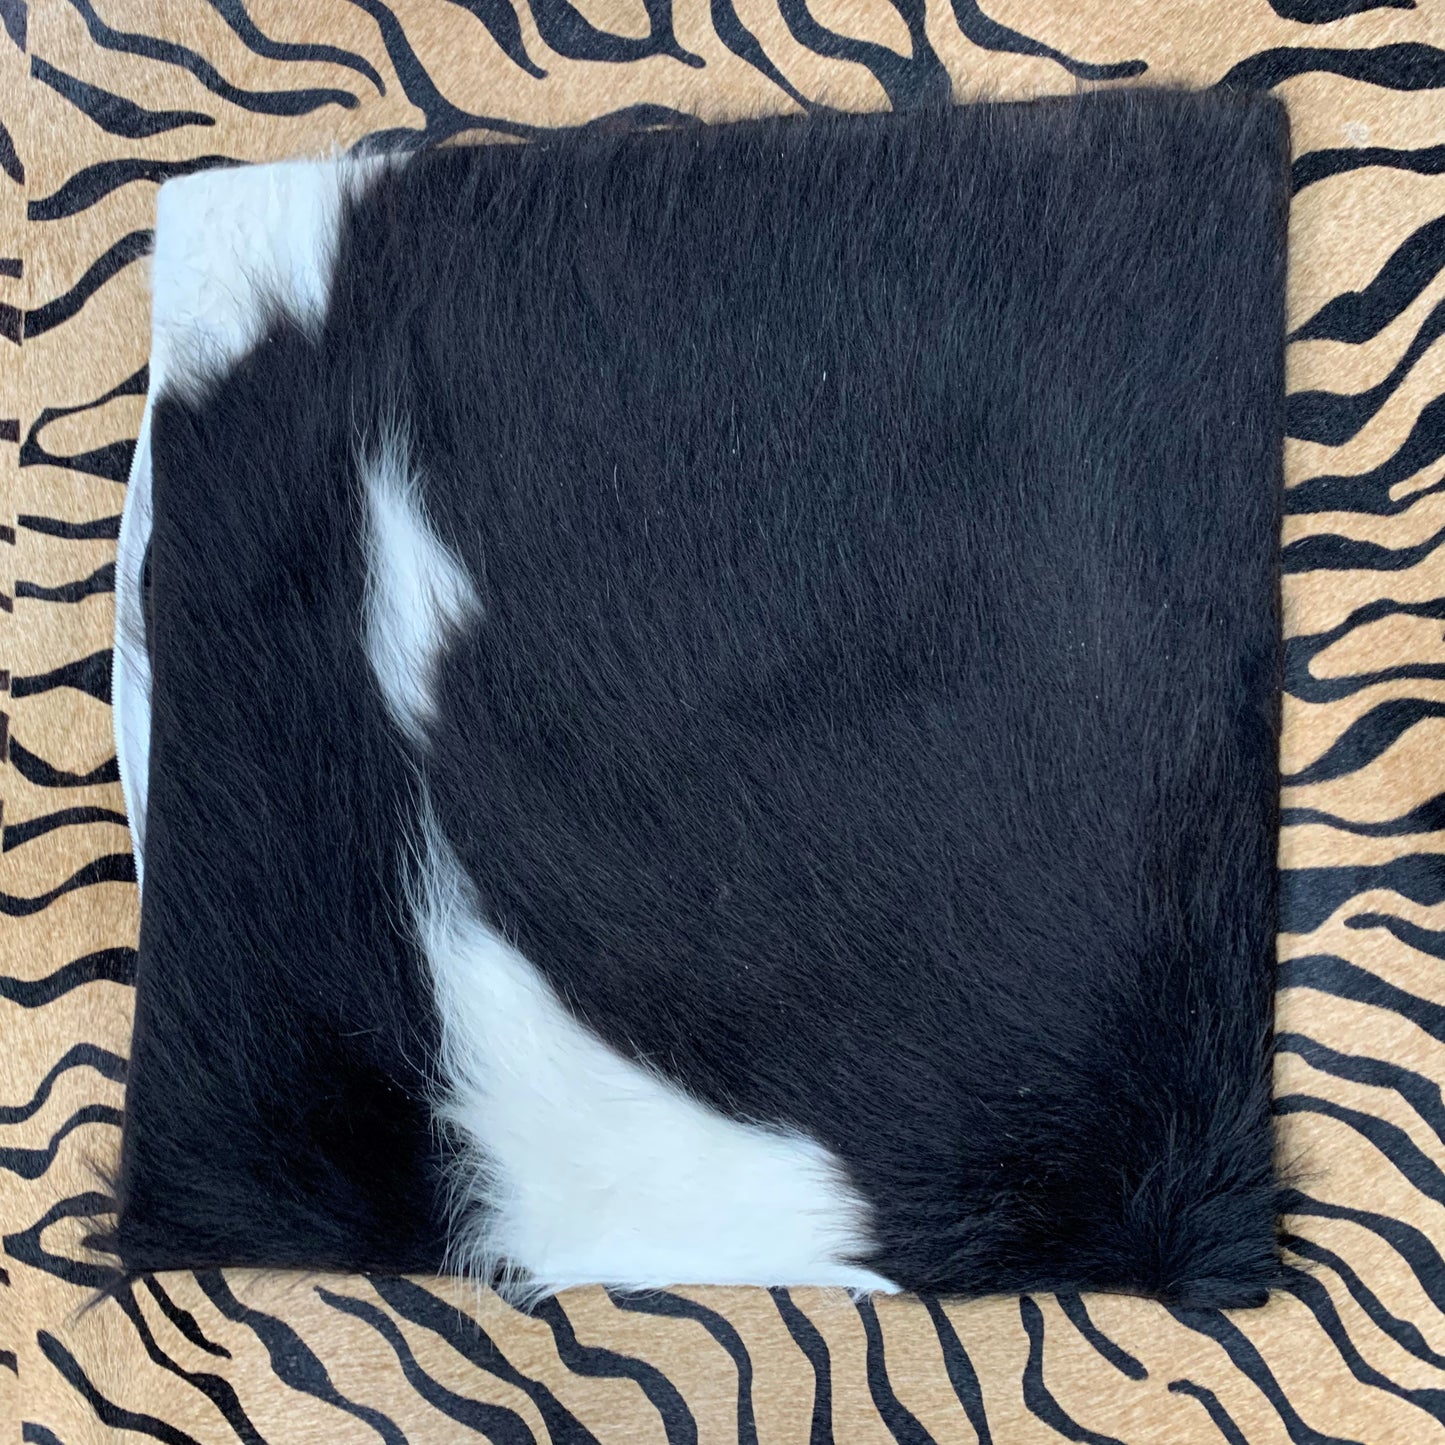 Cowhide Pillows Cushion Covers Leather Real Cow Hide Skin Patchwork 15.5" x 15.5"